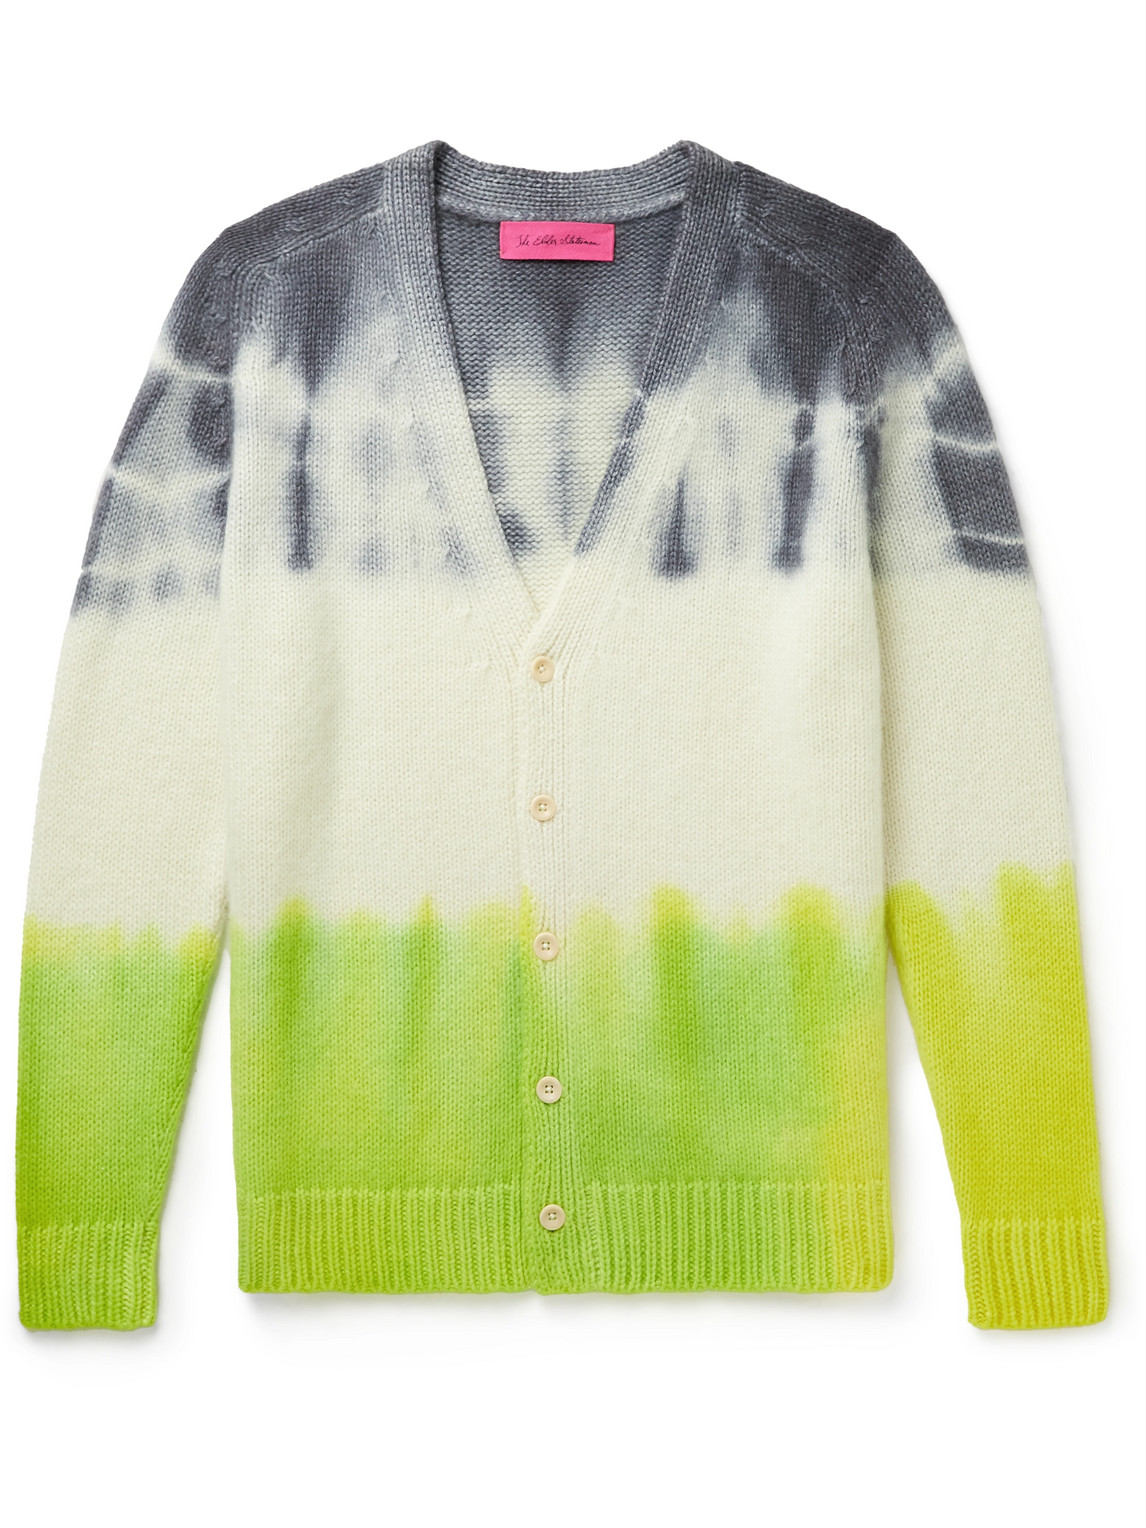 the elder statesman - tie-dyed cashmere and mohair-blend cardigan - men - yellow - s